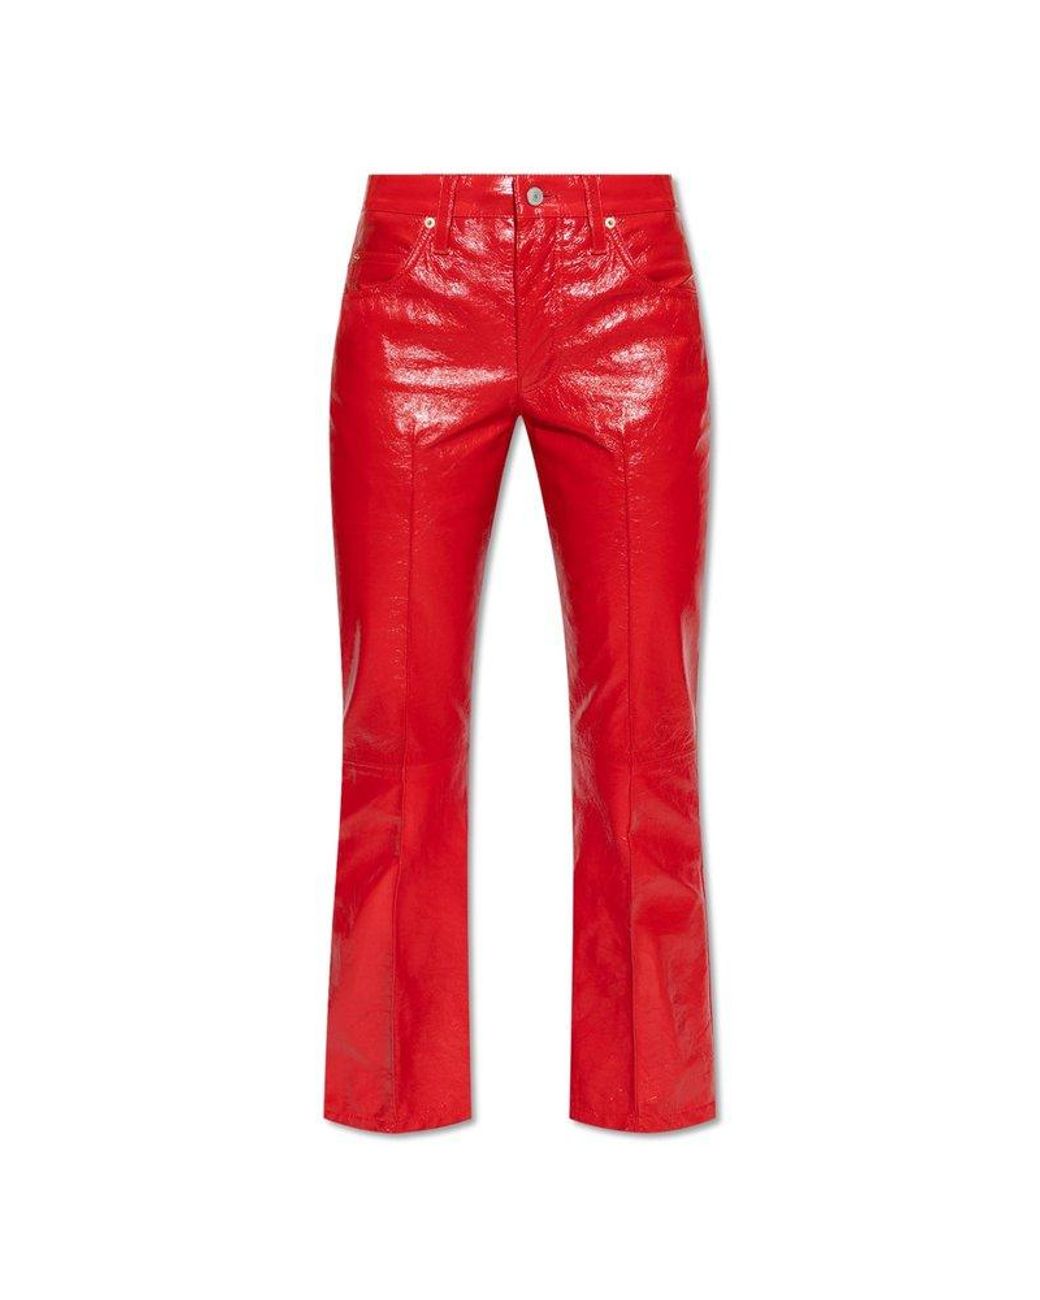 Gucci Leather Trousers in Red